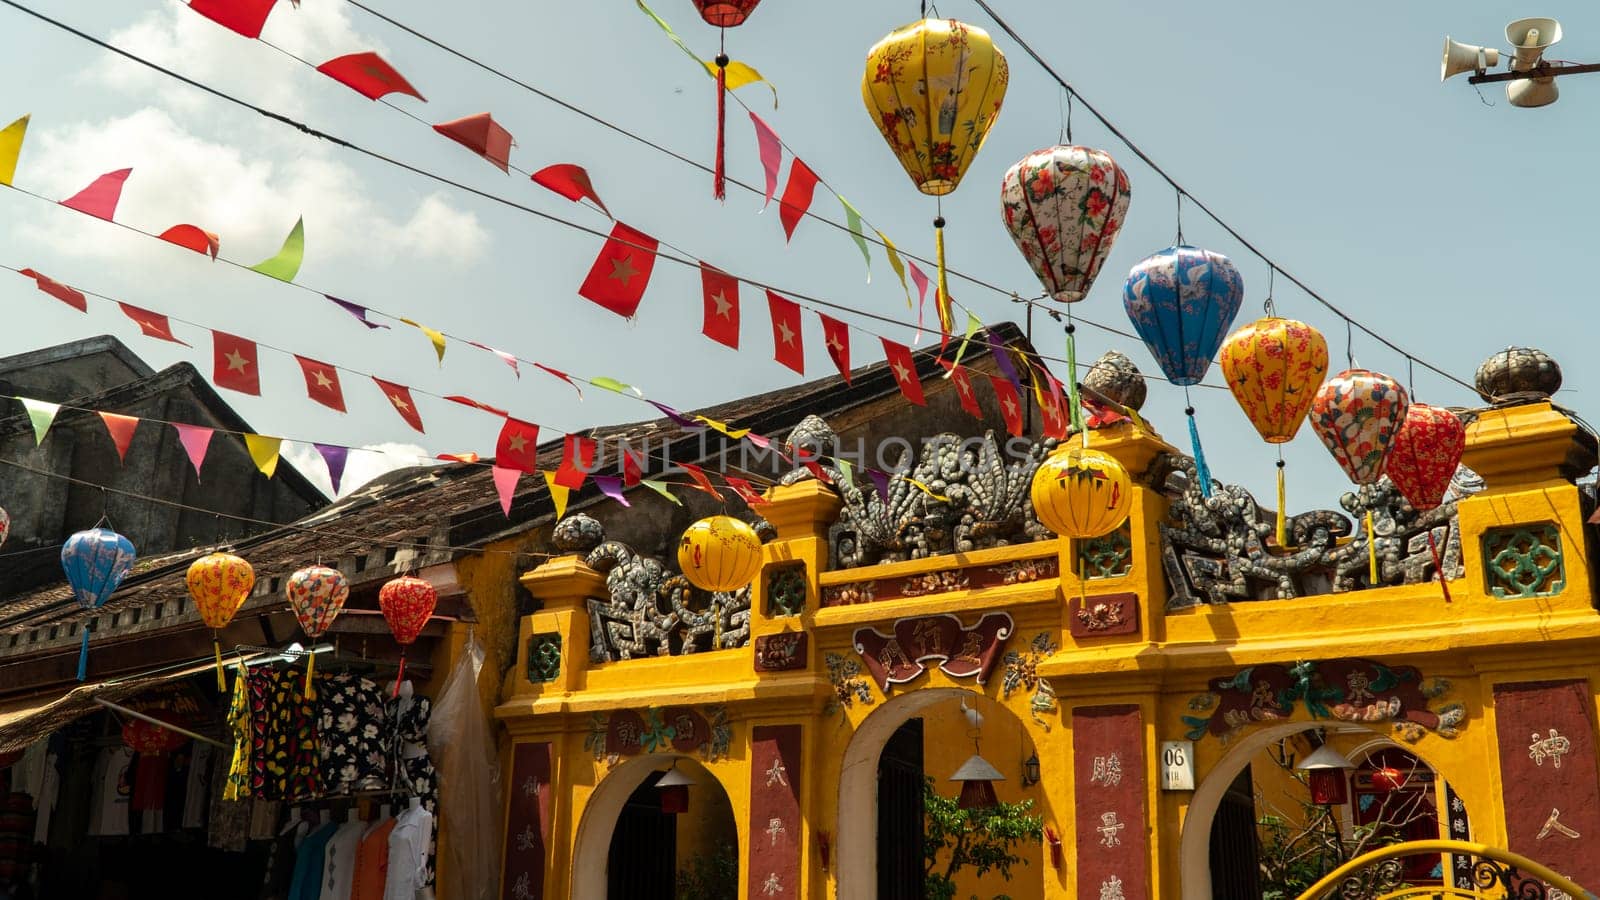 Flags and paper lanterns decorate the street near the temple. High quality photo